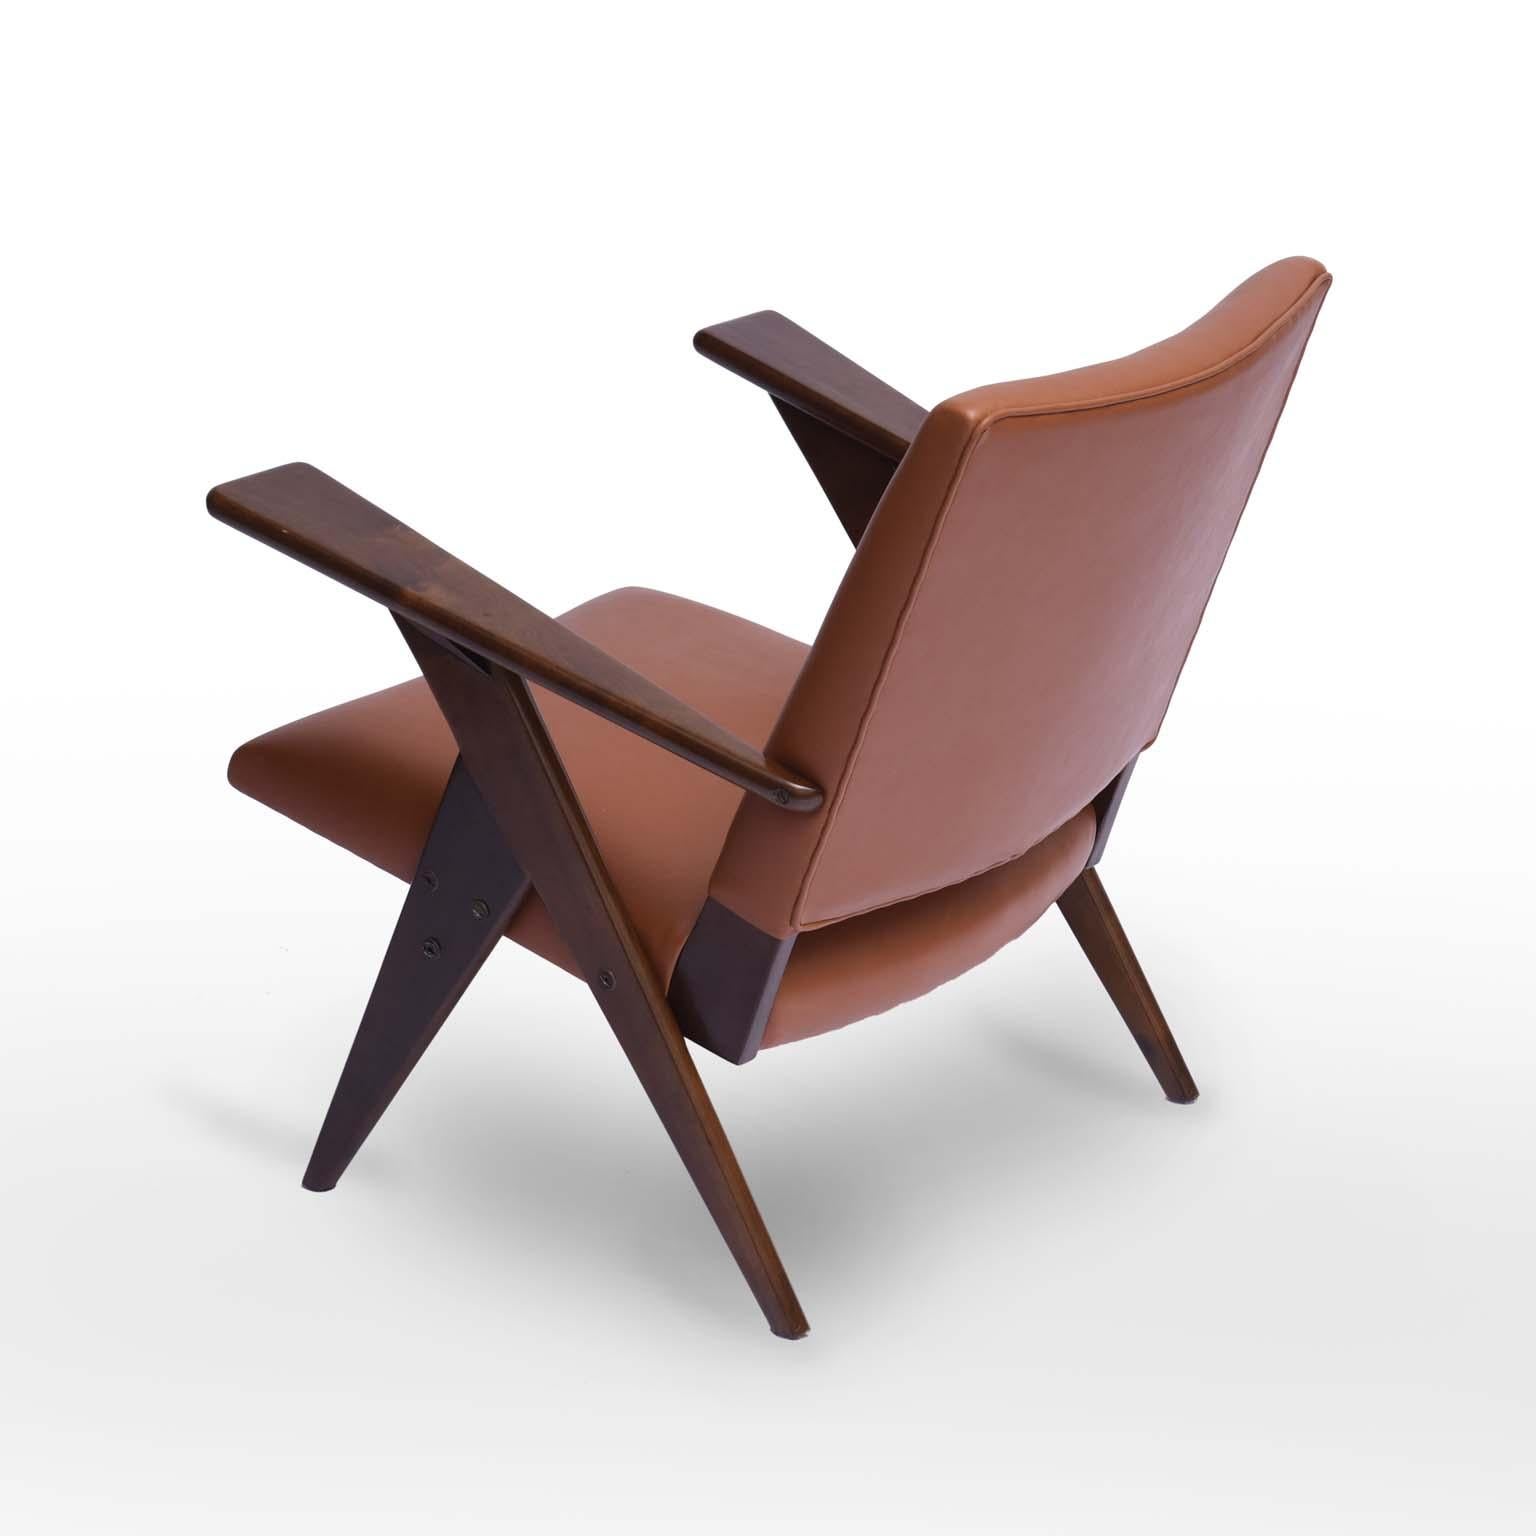 Zanine Caldas Midcentury Brazilian armchair, 1954

One of the most famous armchairs produced by the Móveis Artísticos Z, this comfortable armchair model has wide arms for full support of the user arms.